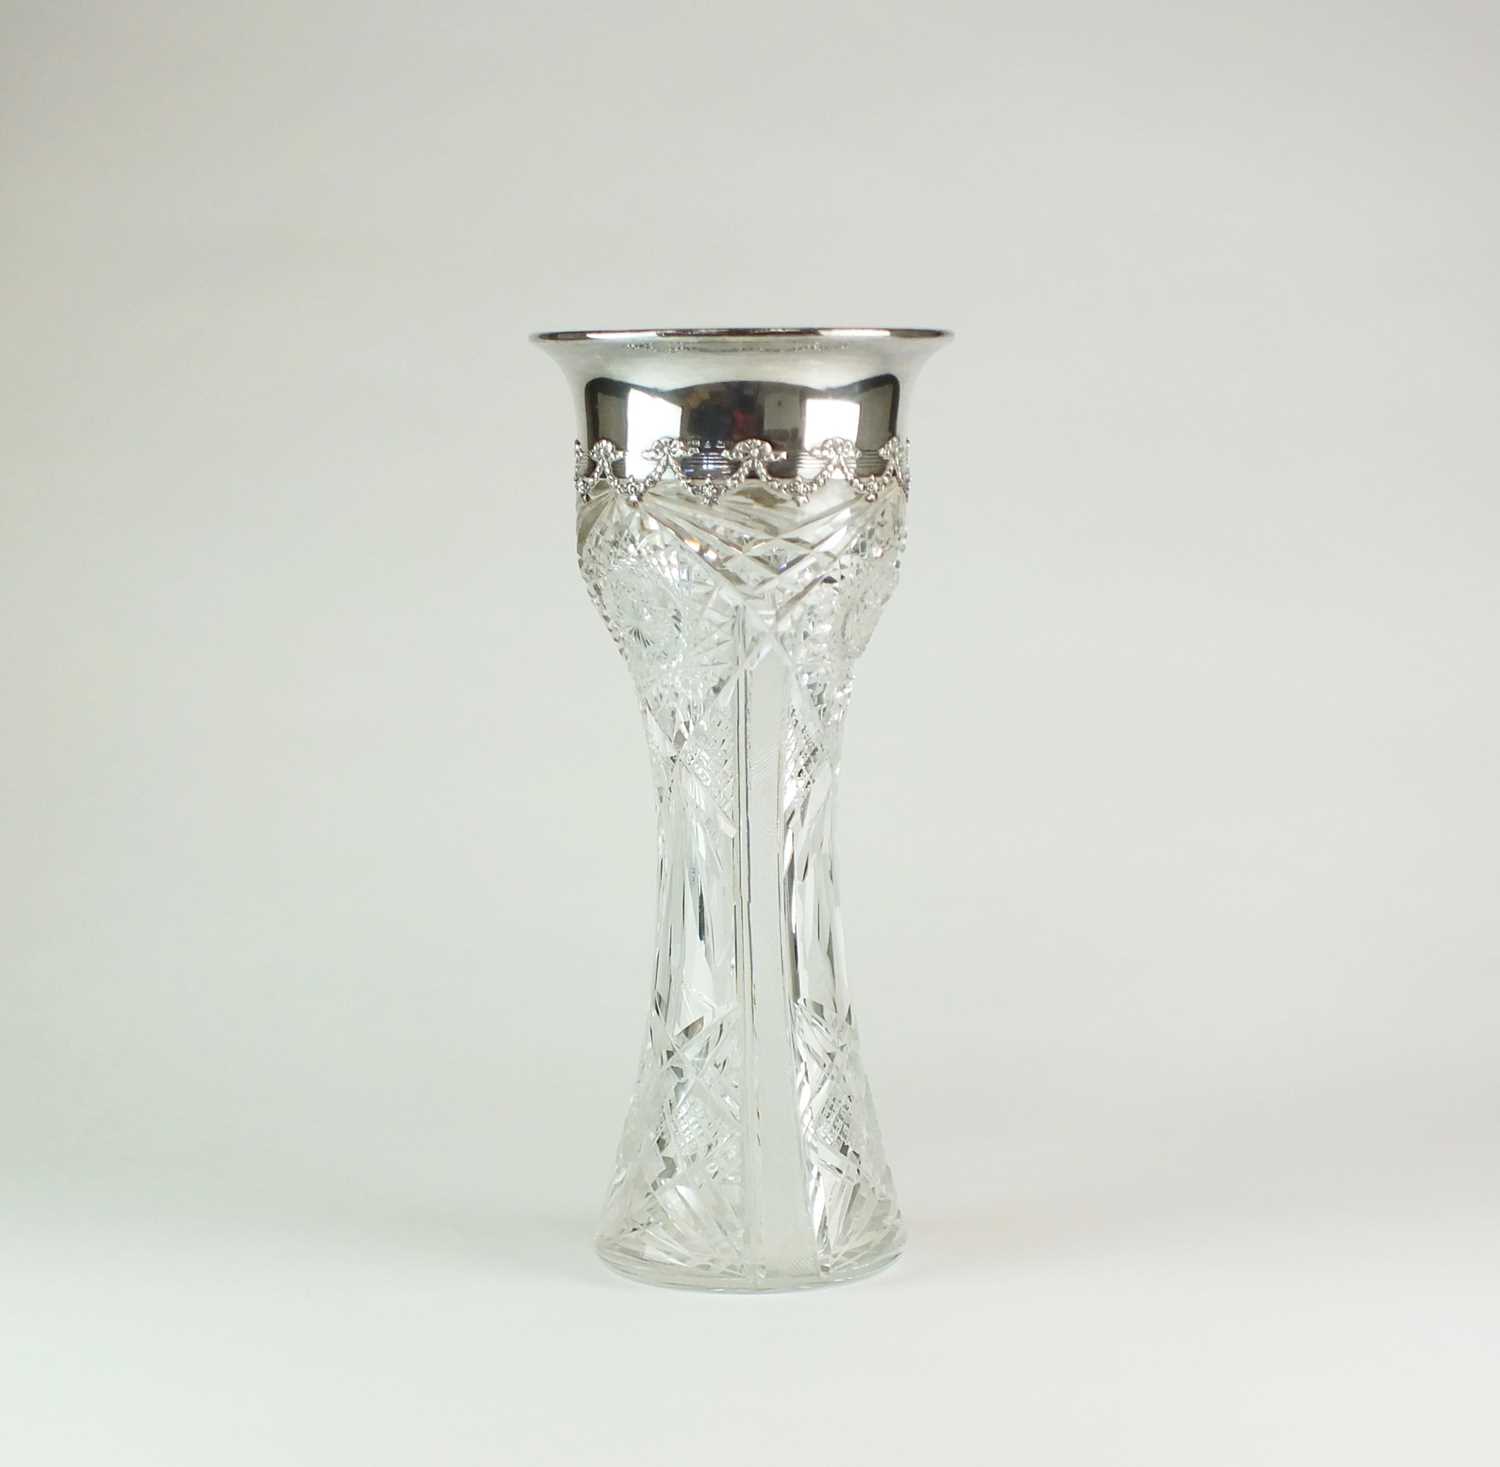 Lot 14 - A large silver mounted cut glass vase